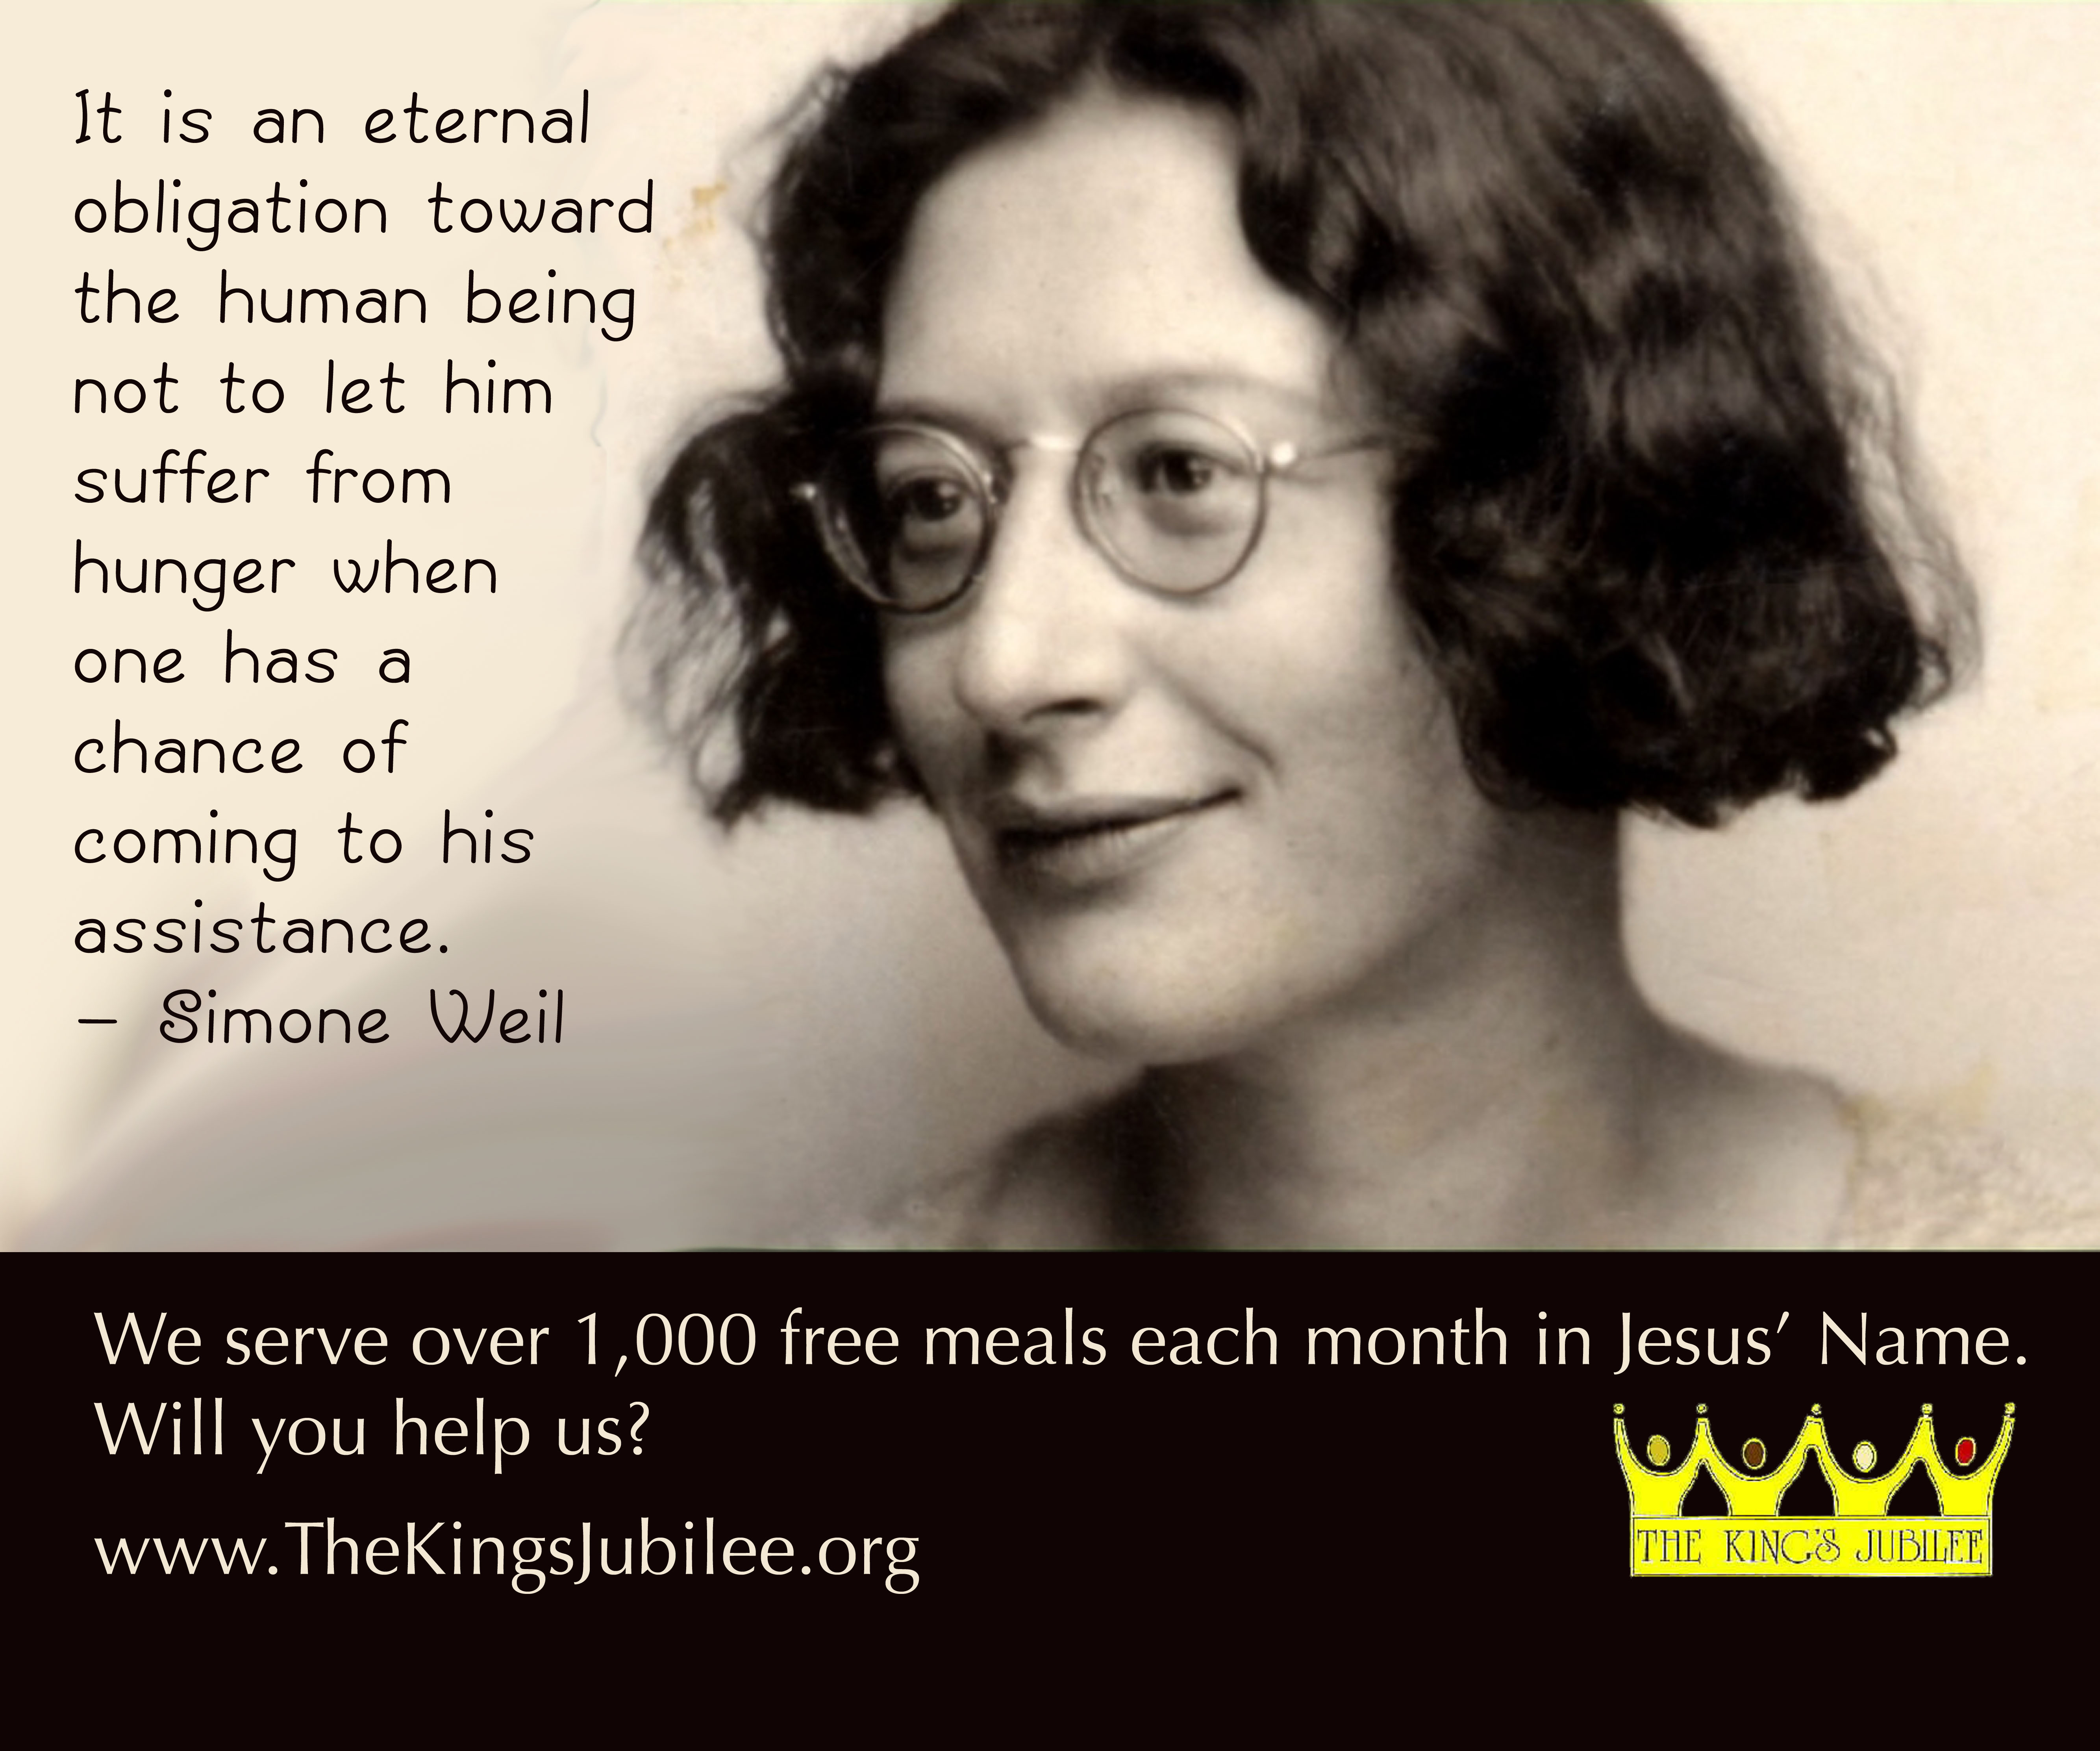 Simone Weil's quote #6